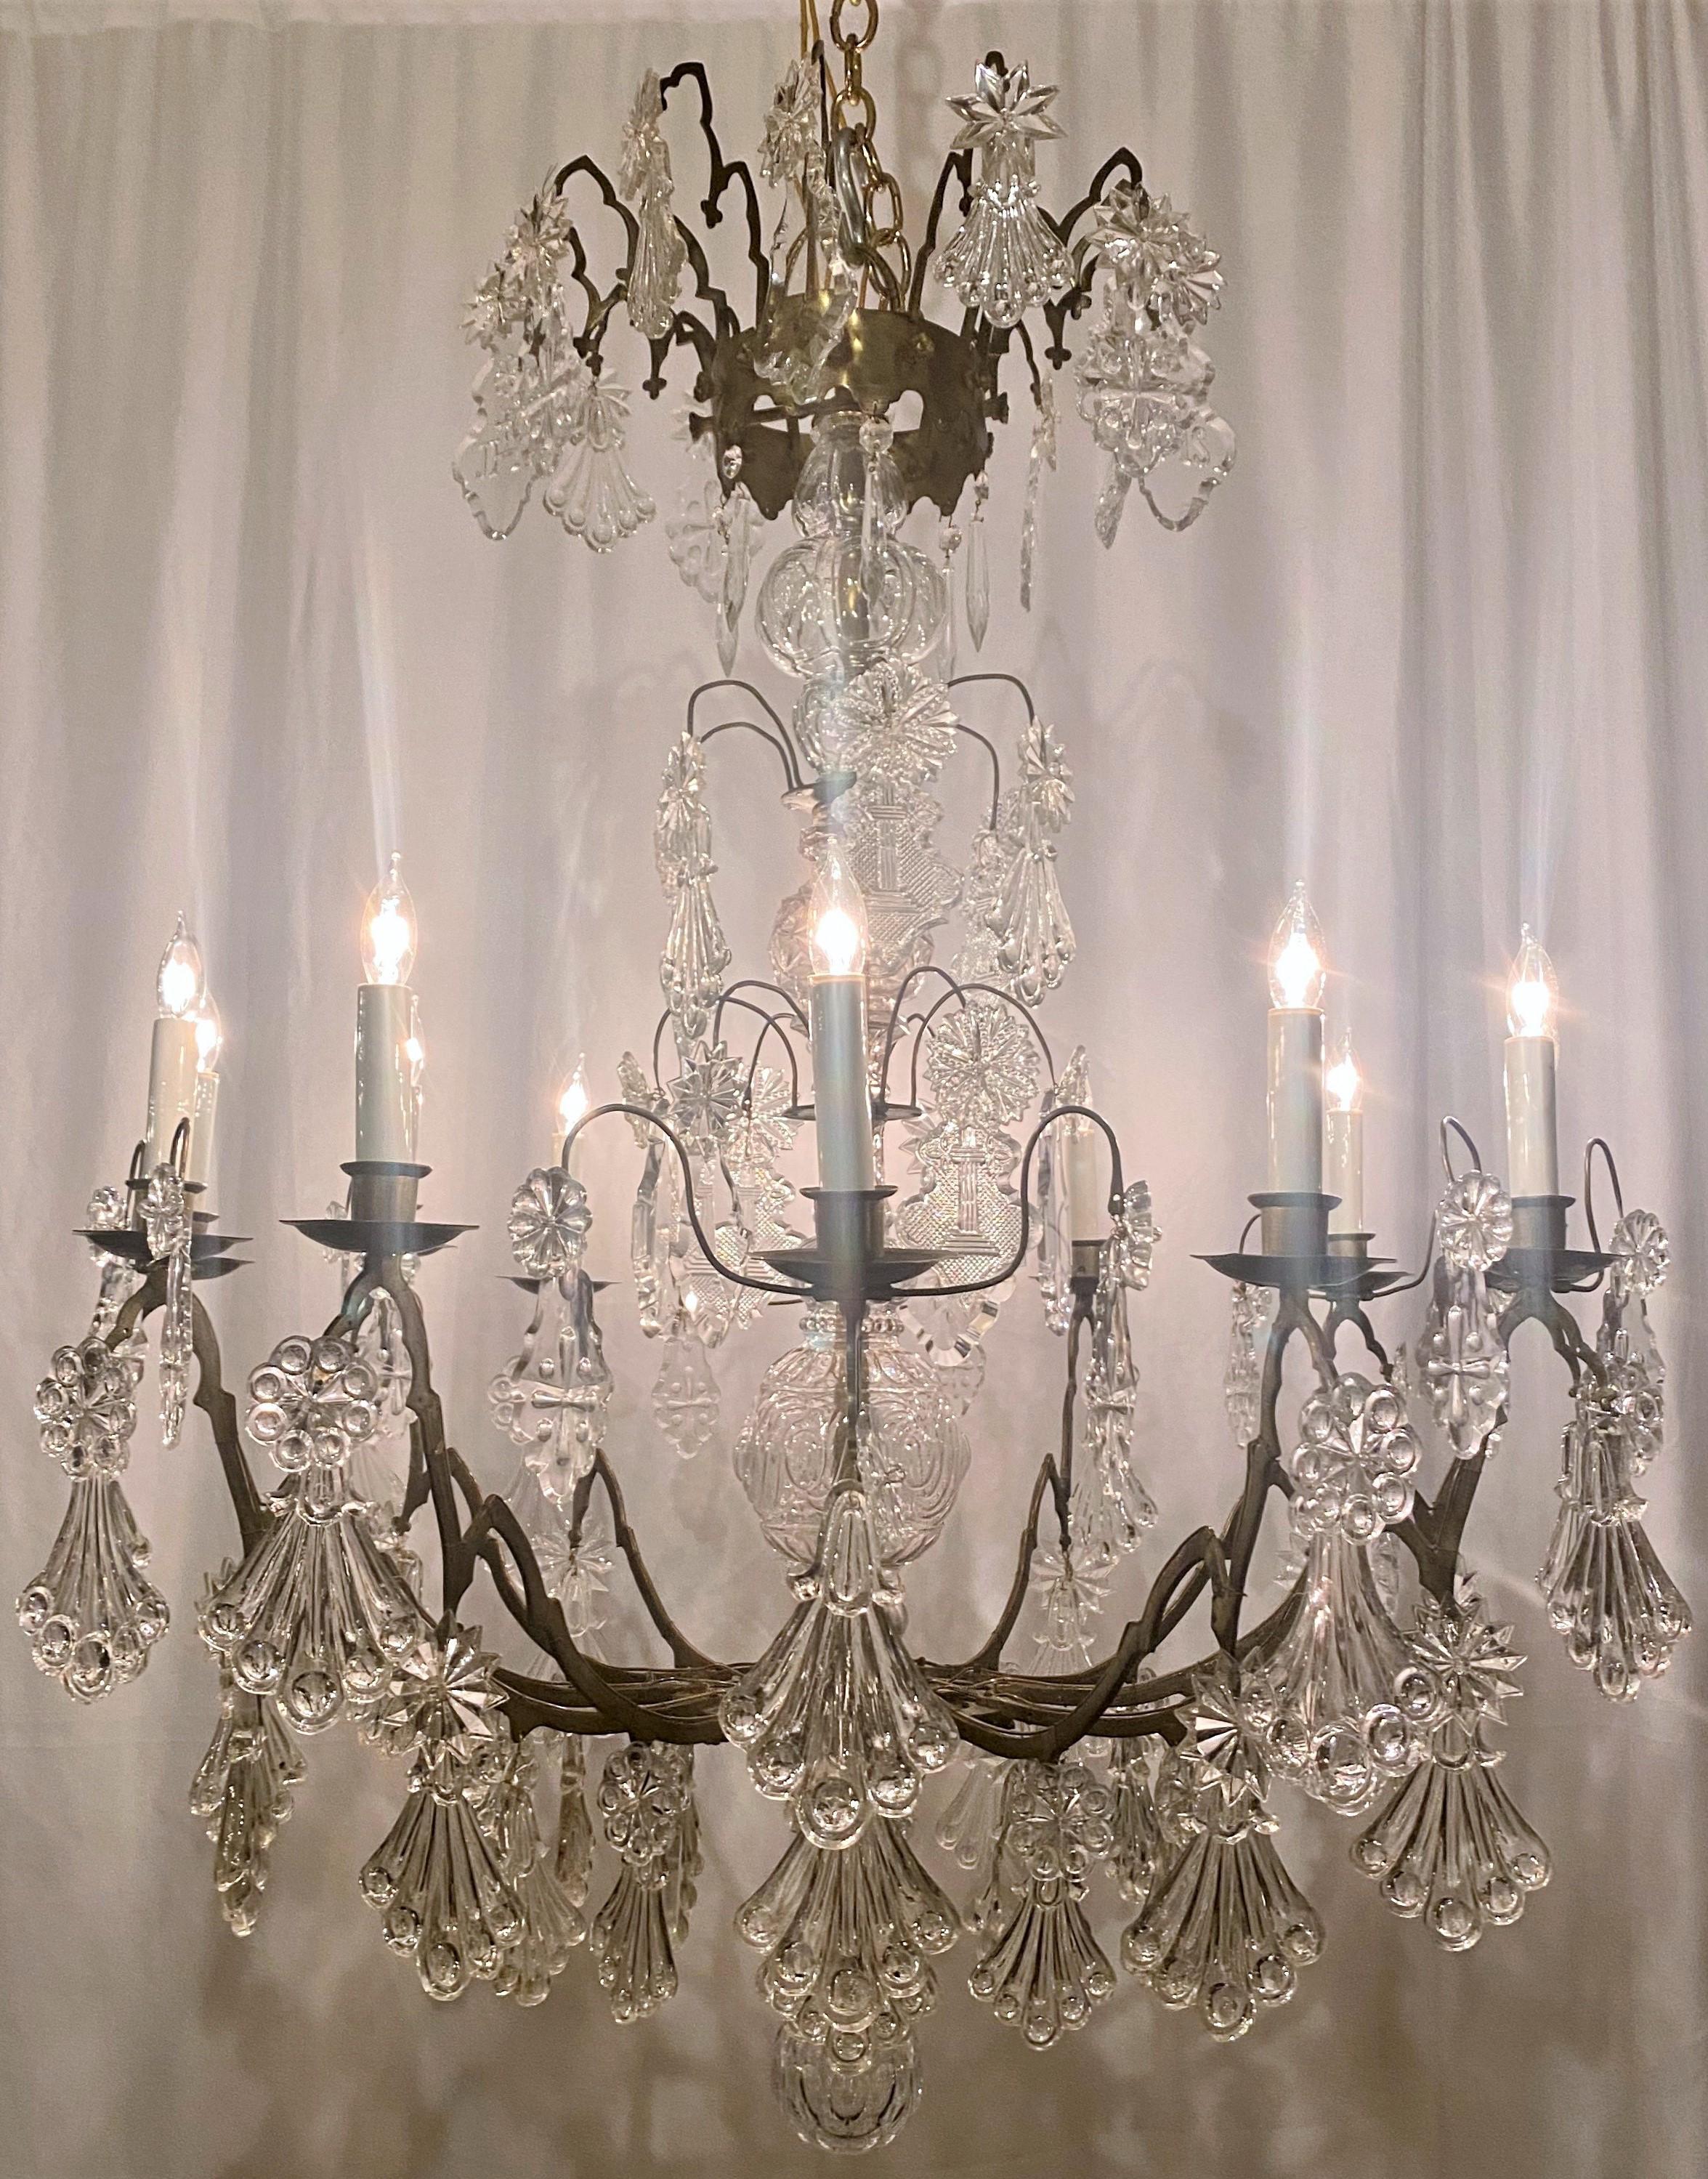 Antique French crystal and bronze chandelier, circa 1880.
CHC328.